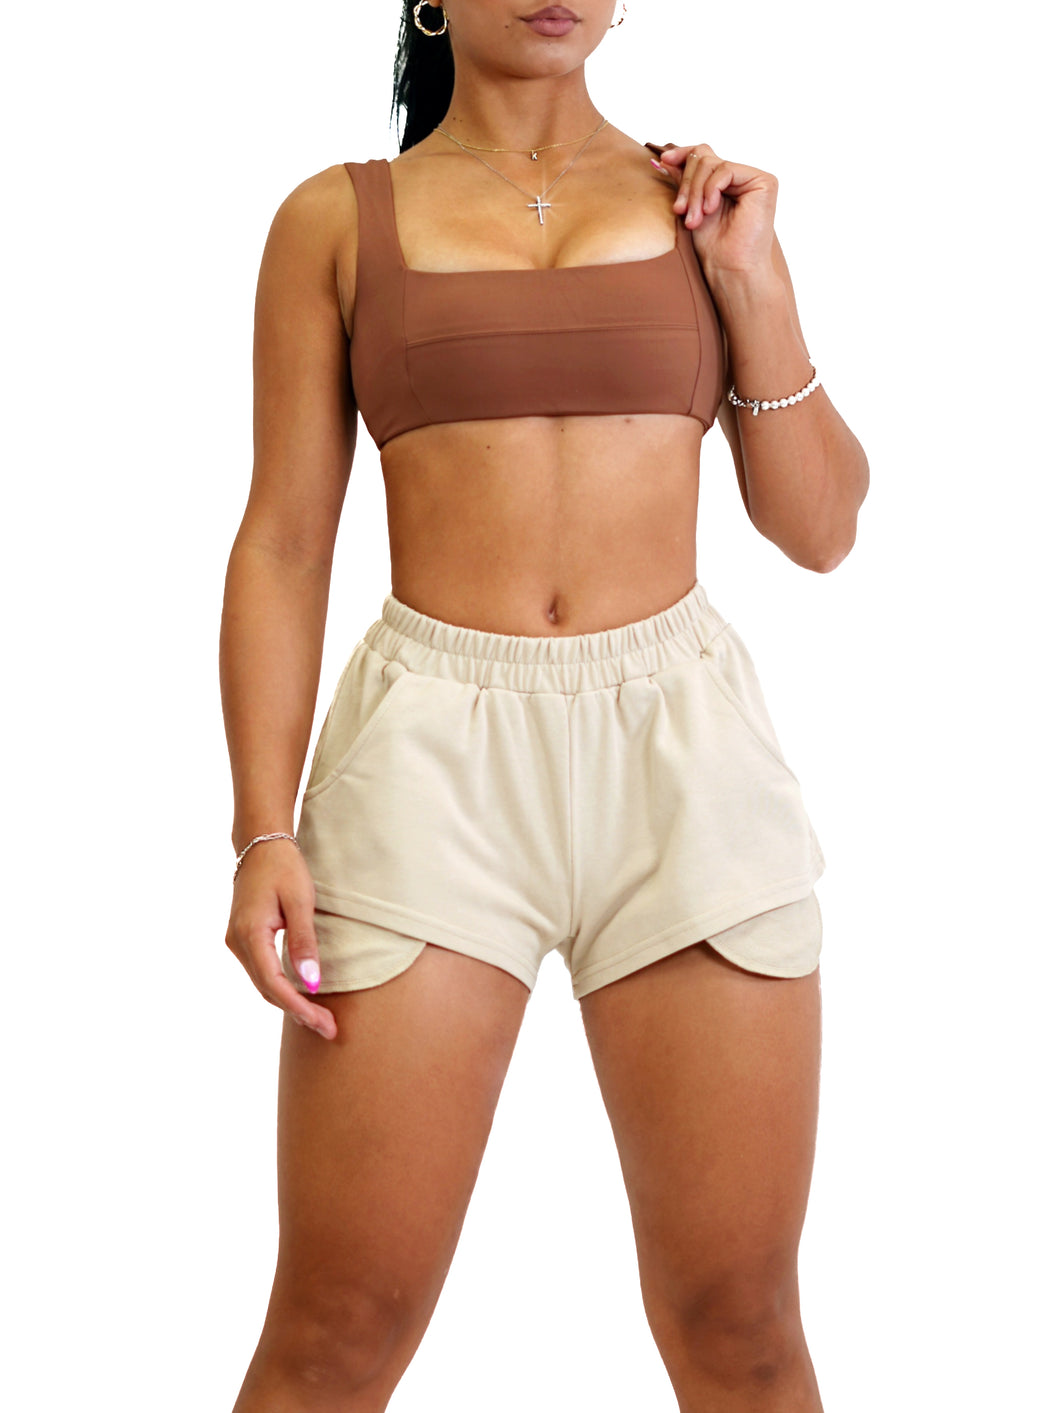 Country Girl Sports Bra (Sweet Brown)